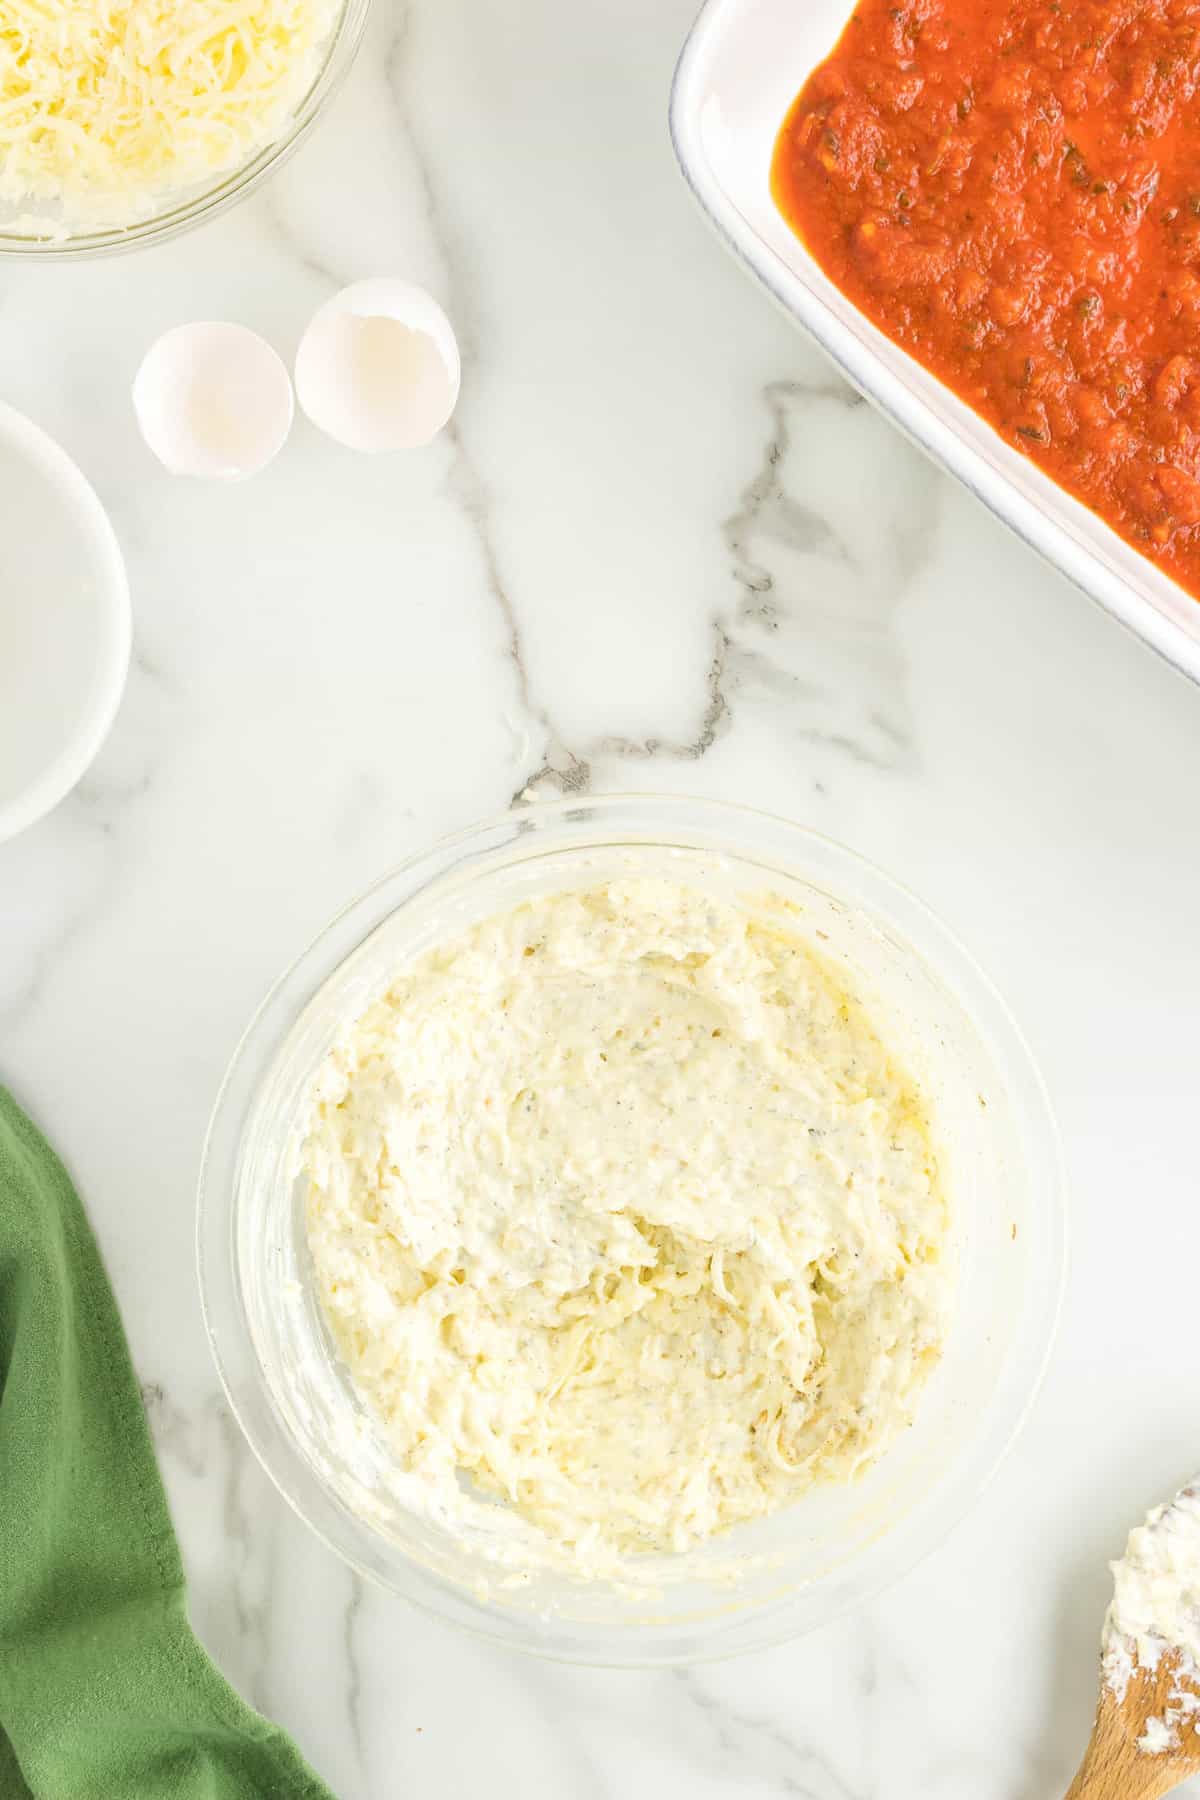 Combined Cheese Mixture for Stuffed Shells Recipe